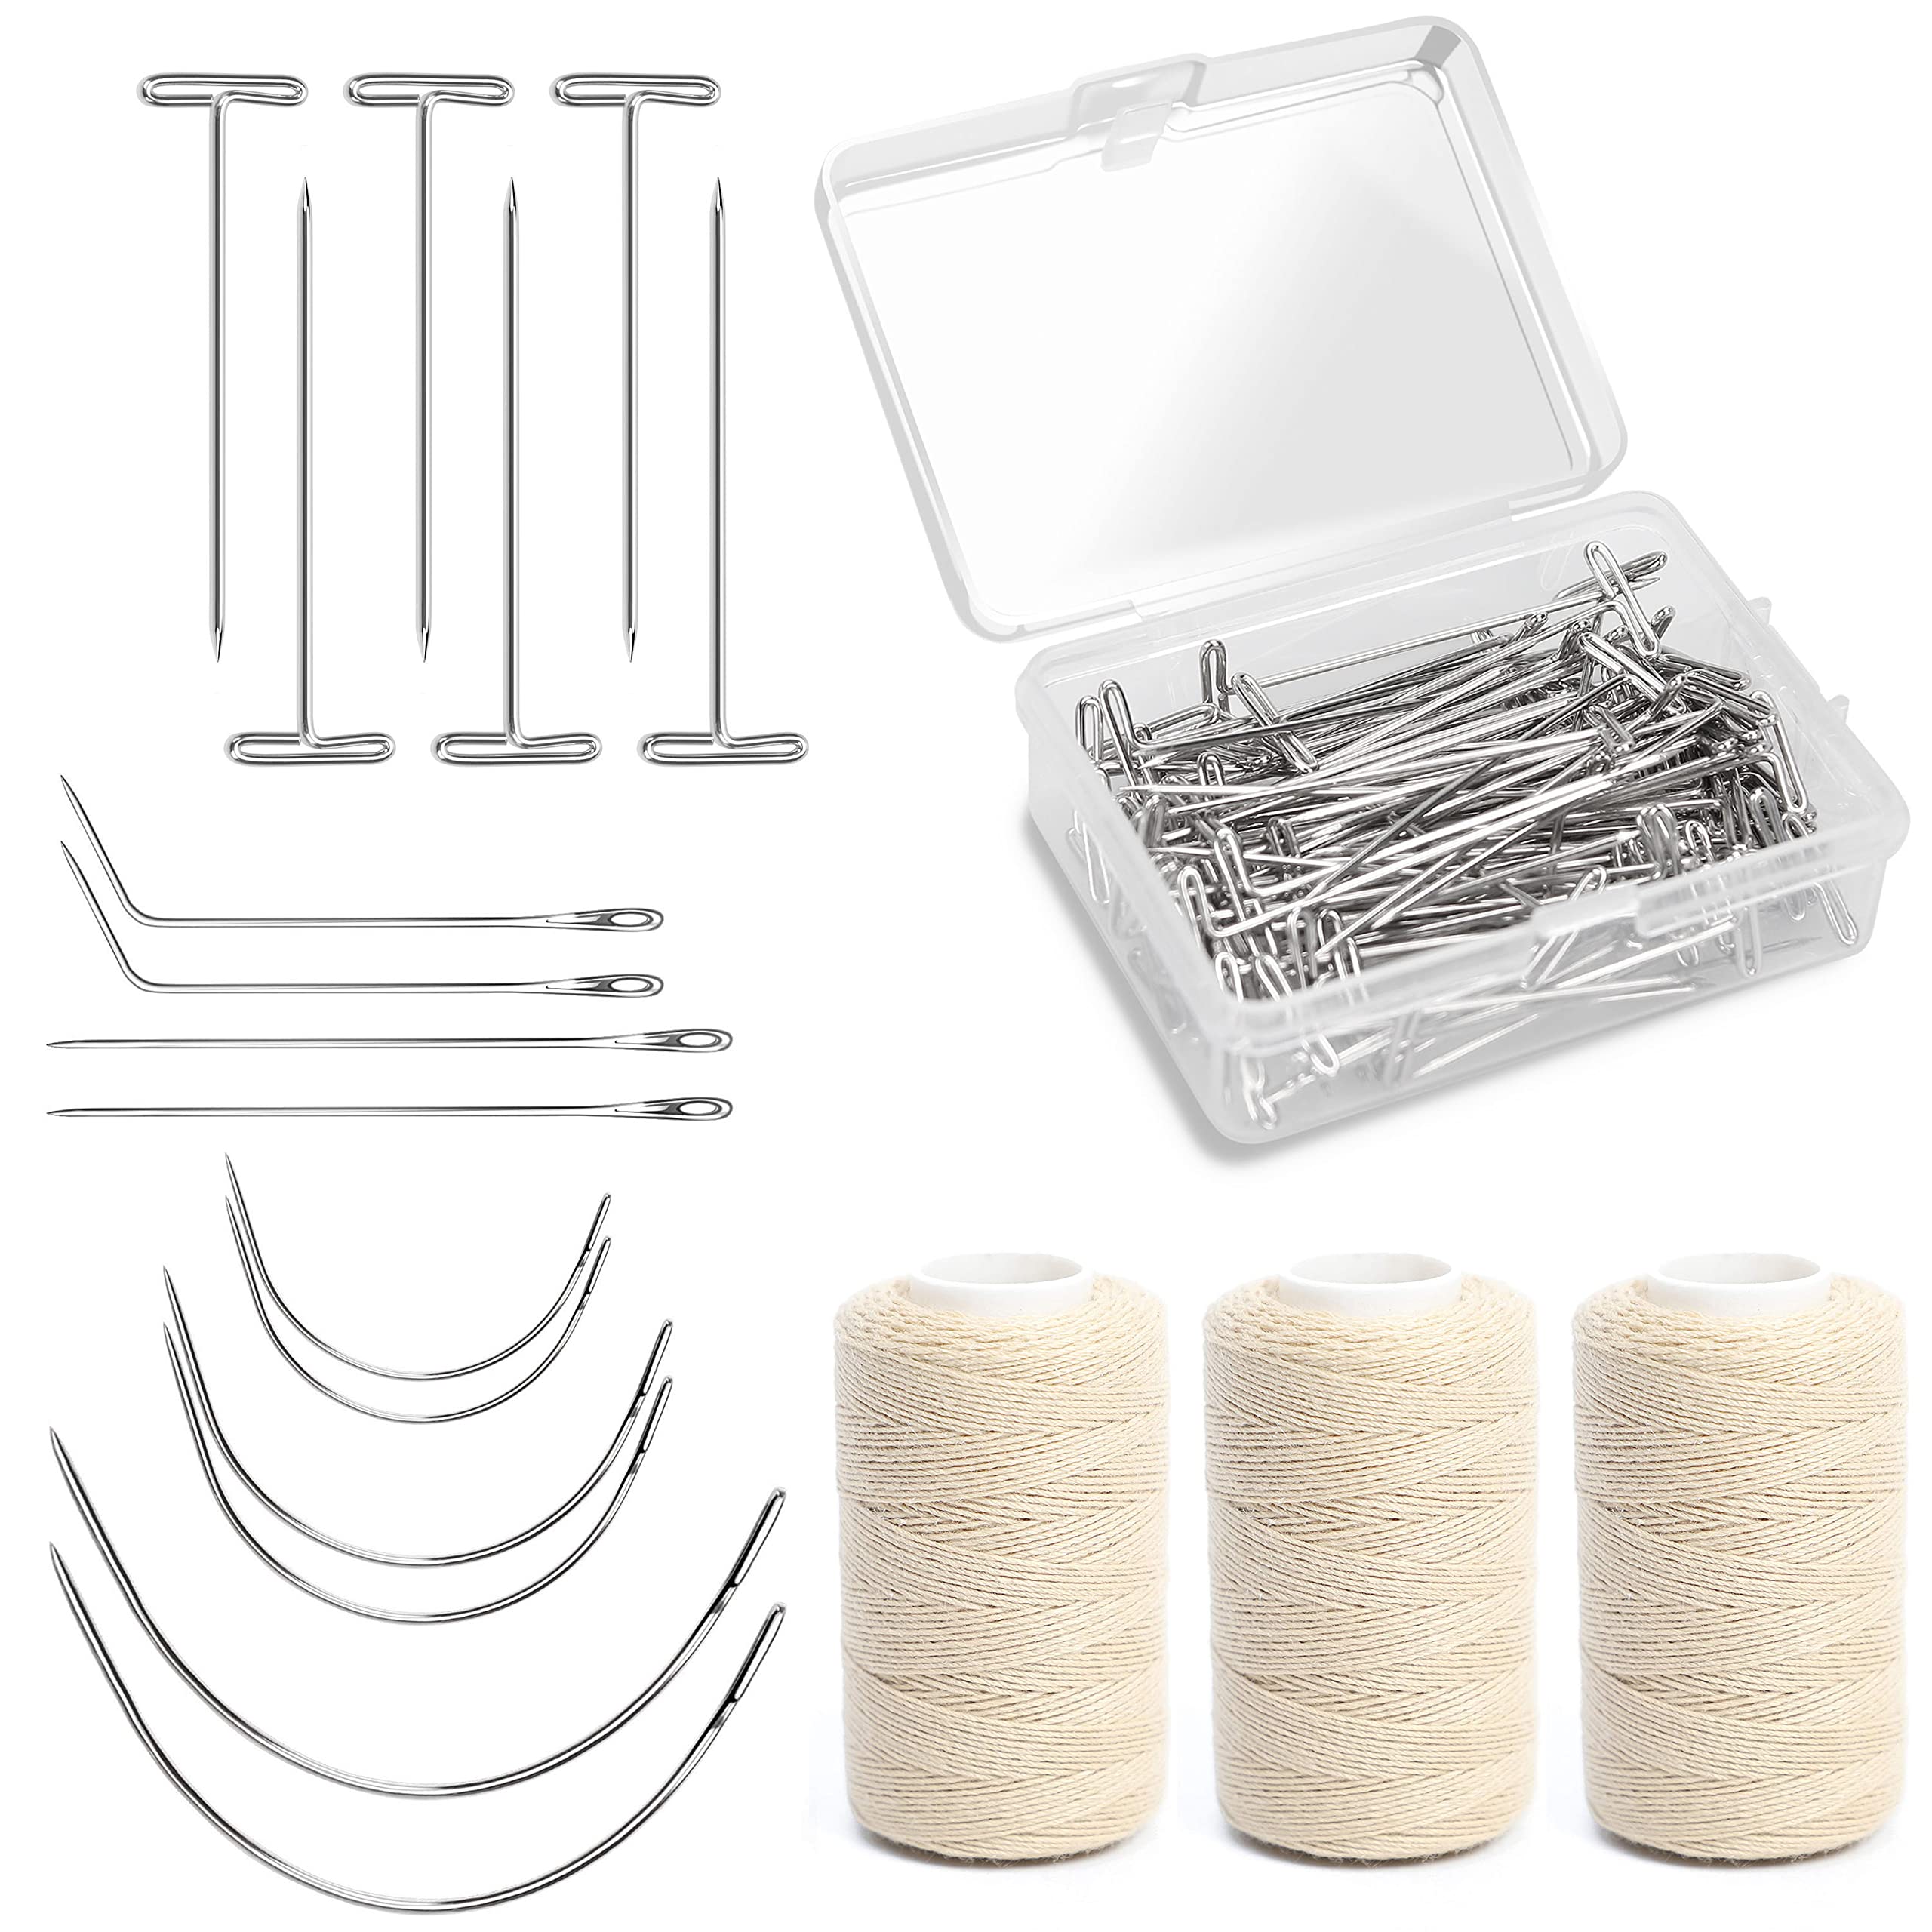 Ryalan Weaving Needle Set, Blond Thread with 10 pcs Needle 100 Pcs  Stainless Steel T-Pins for Making Wig Sewing Hair Weave Extension (3 Thread  Blond, 10 Needle, 100 T-Pins)